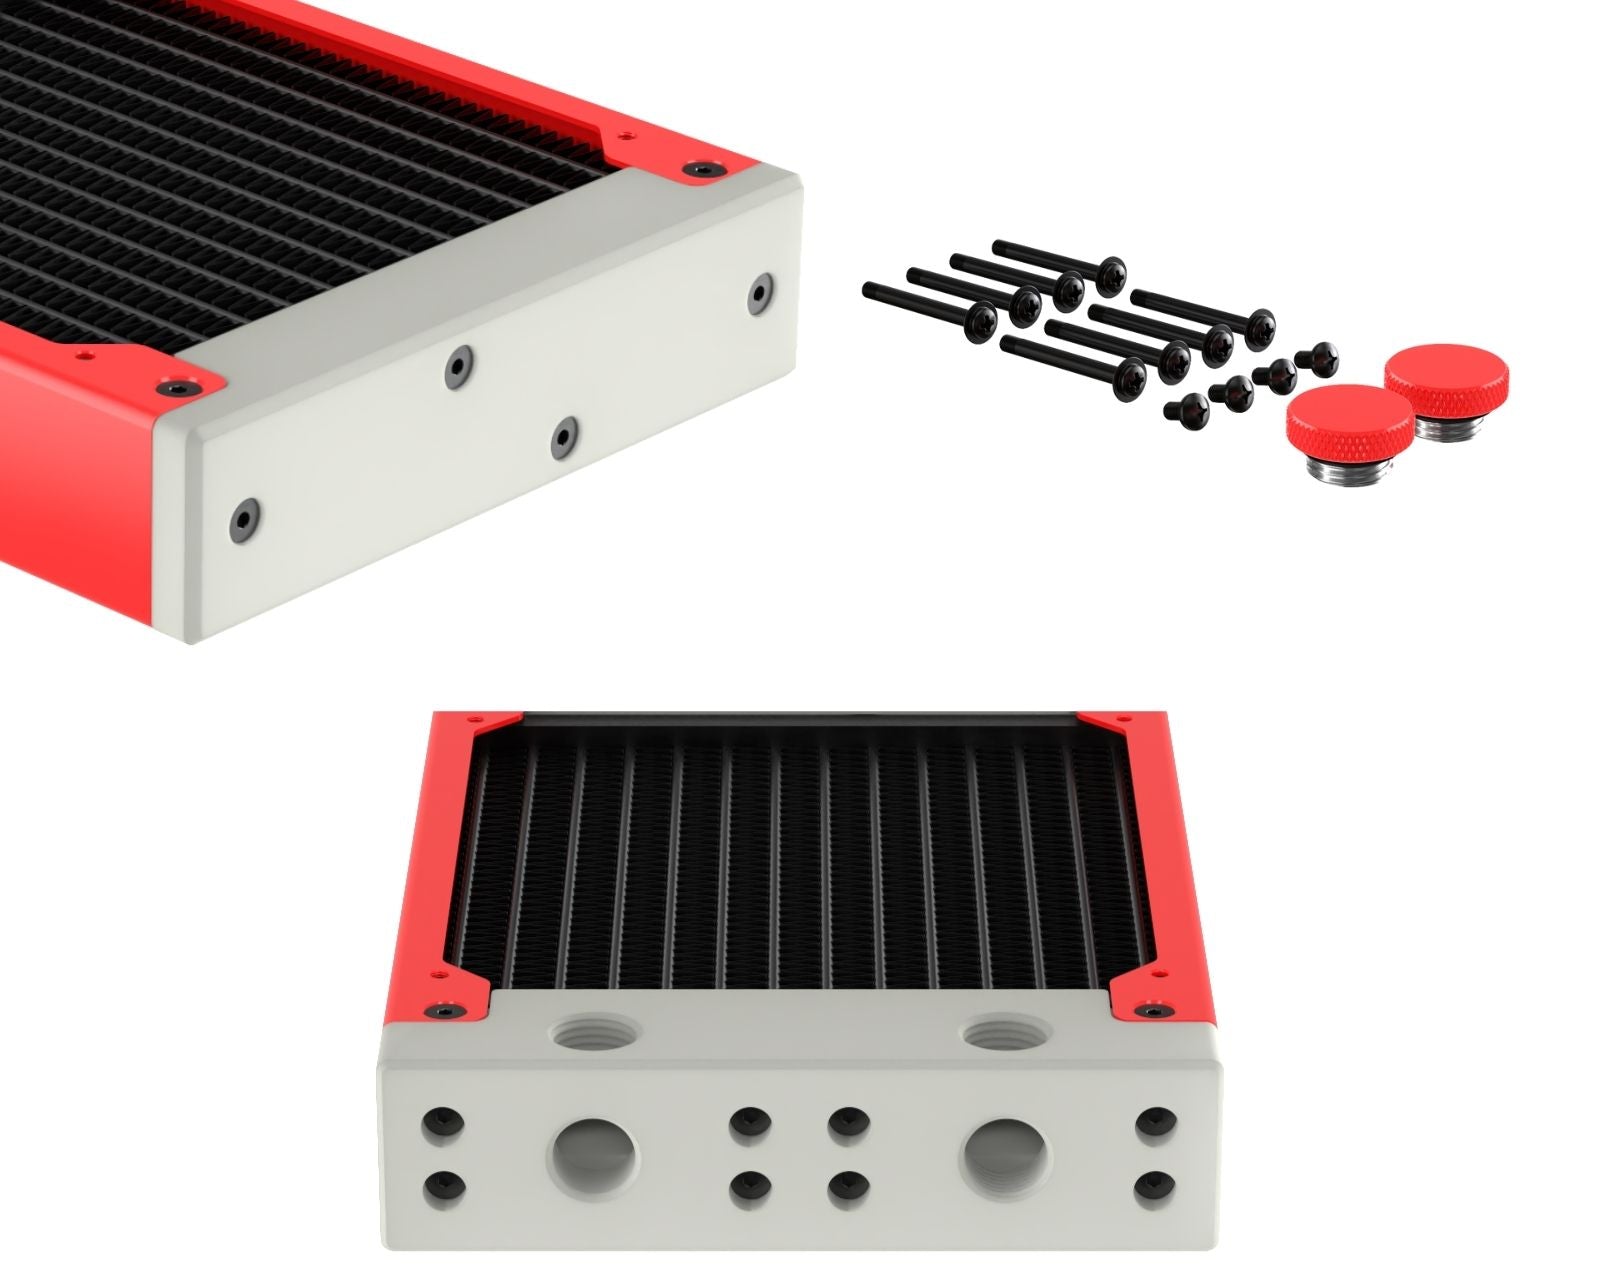 PrimoChill 240SL (30mm) EXIMO Modular Radiator, White POM, 2x120mm, Dual Fan (R-SL-W24) Available in 20+ Colors, Assembled in USA and Custom Watercooling Loop Ready - UV Red